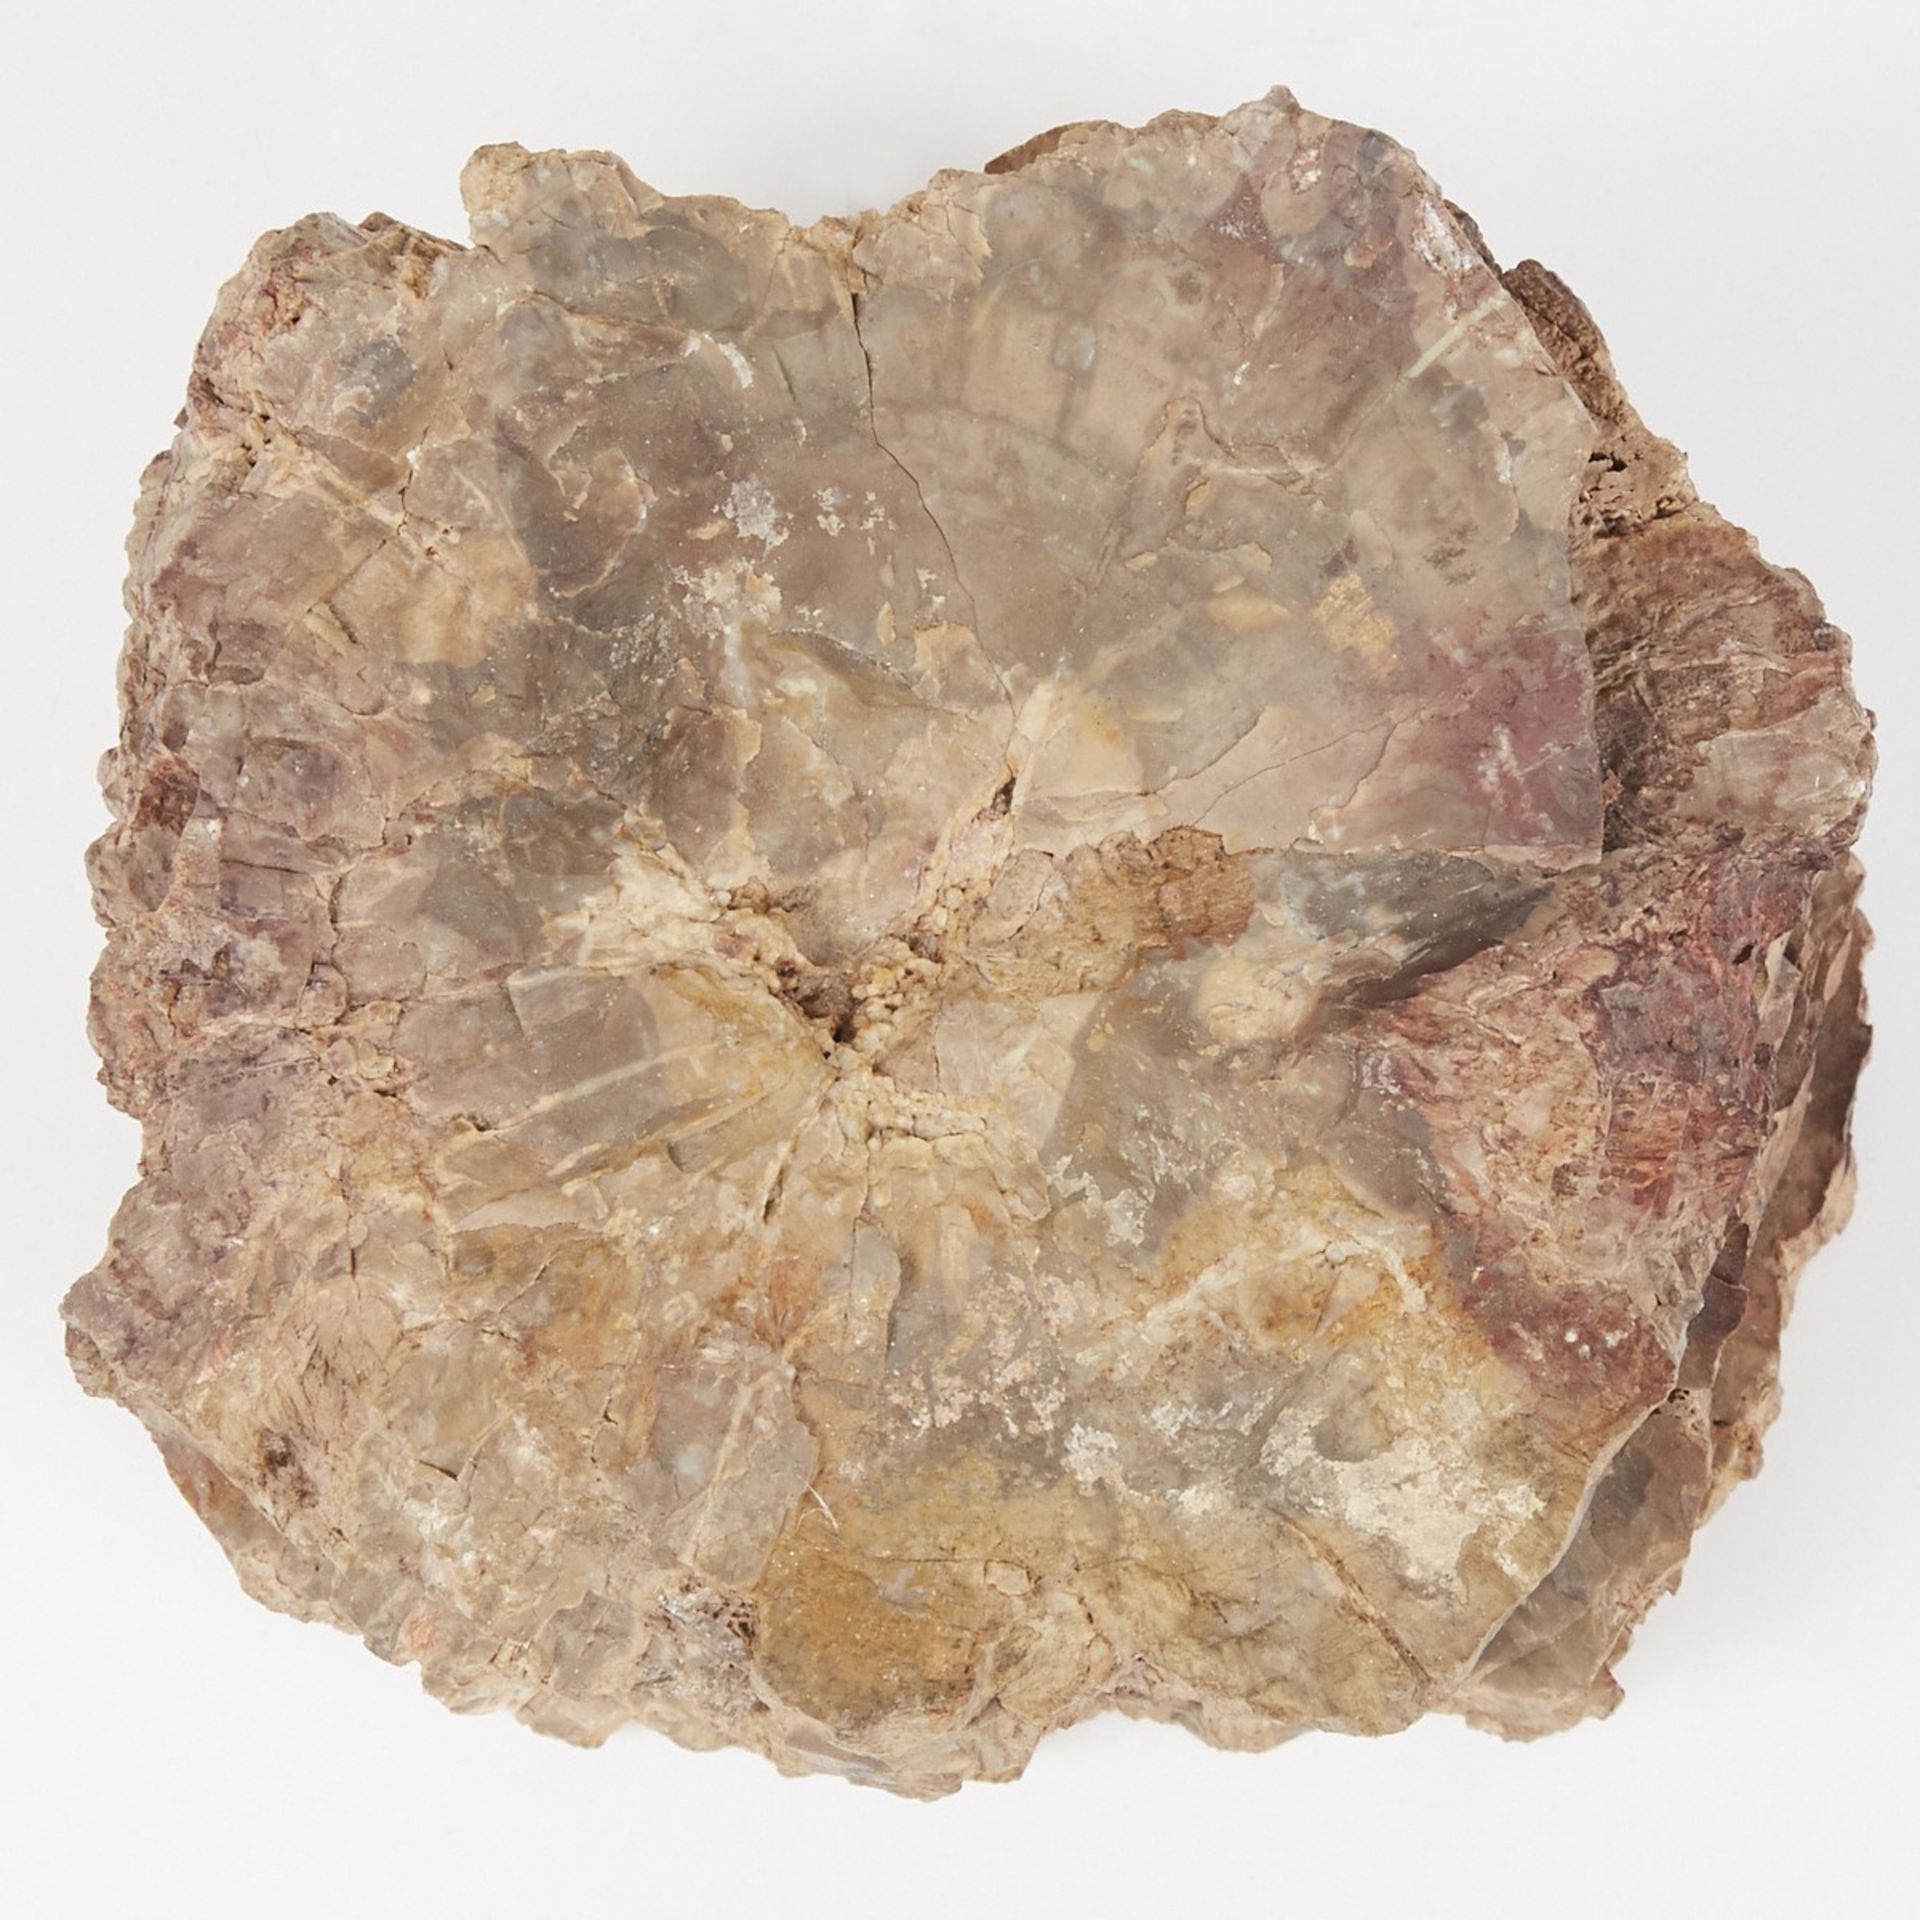 Large Petrified Wood Stump or Branch - Image 6 of 7